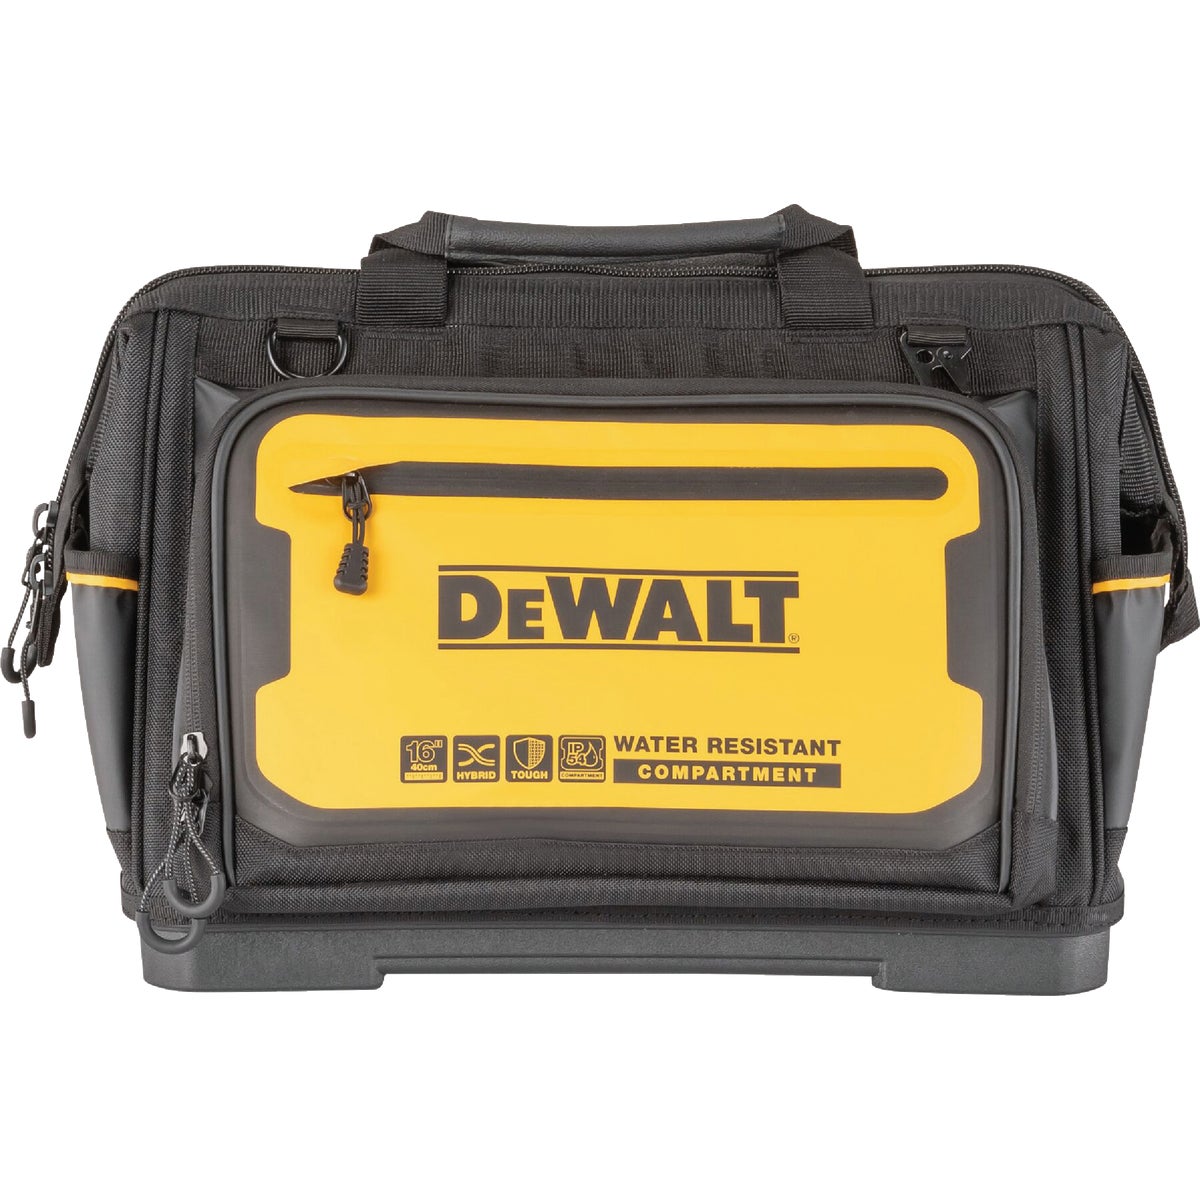 Item 303493, Optimize tool visibility and accessibility on the job with the DEWALT 16 in